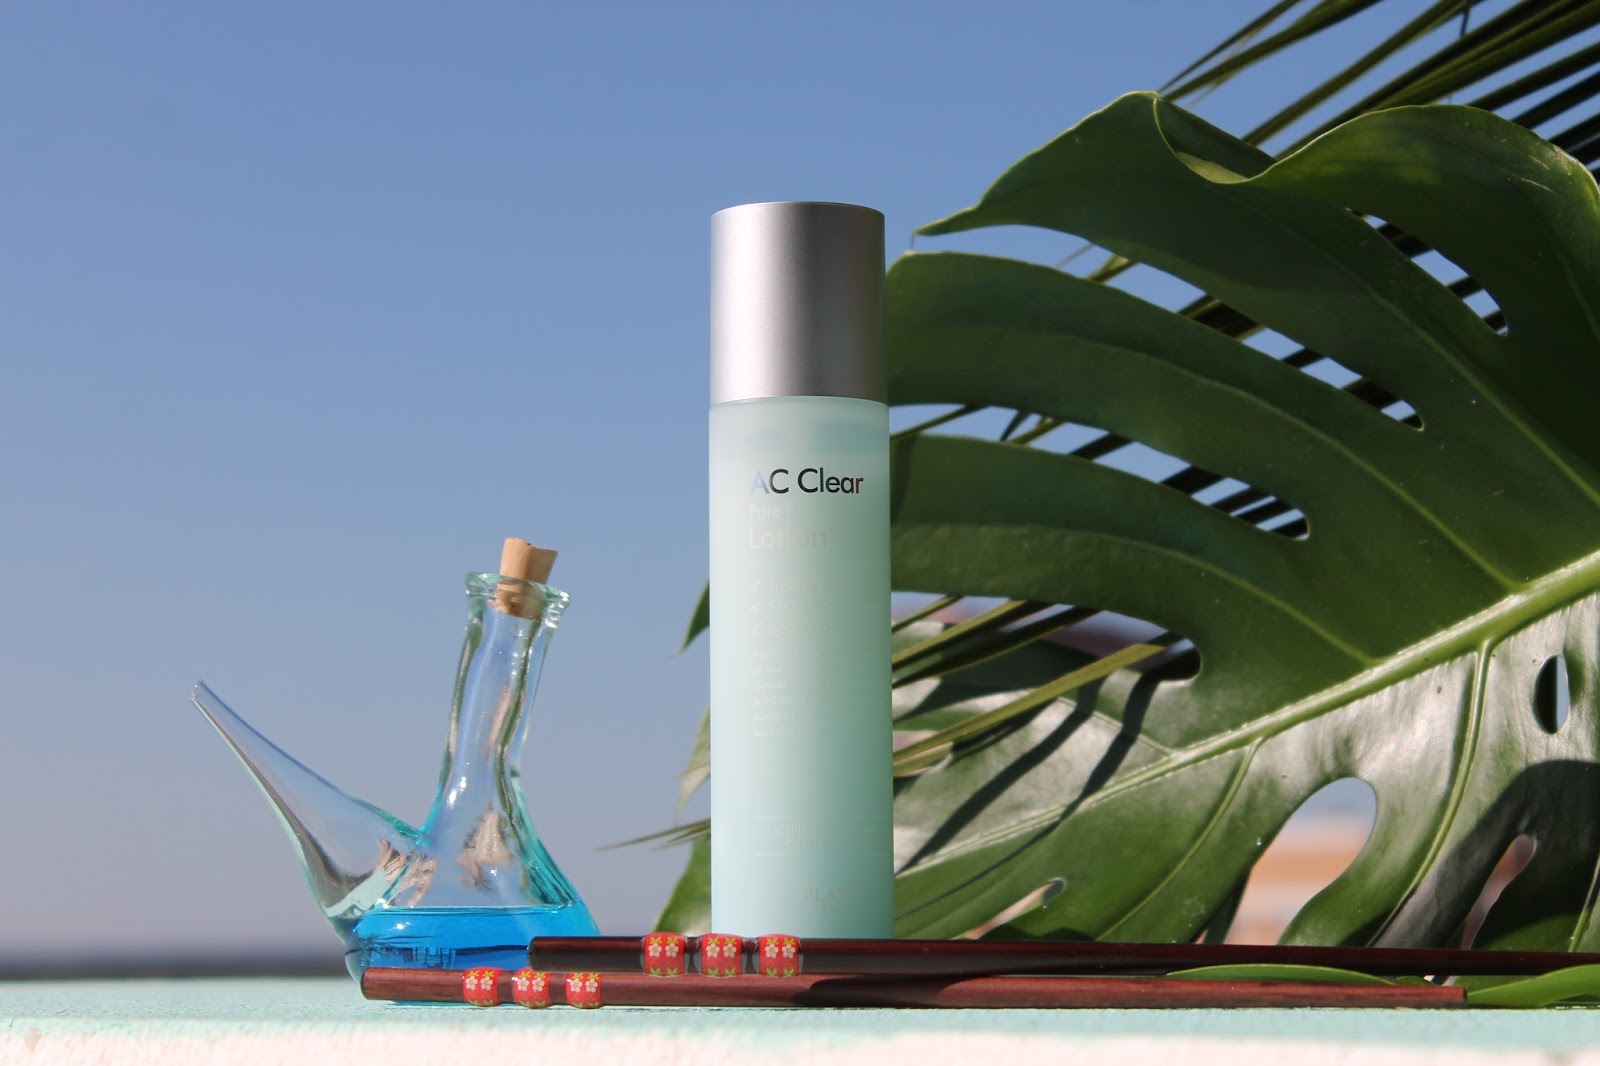 Ac clear. Тонер the Plant Base. The Plant Base AC Clear. Эколон лосьон. The Plant Base AC Clear Pure n Skin.